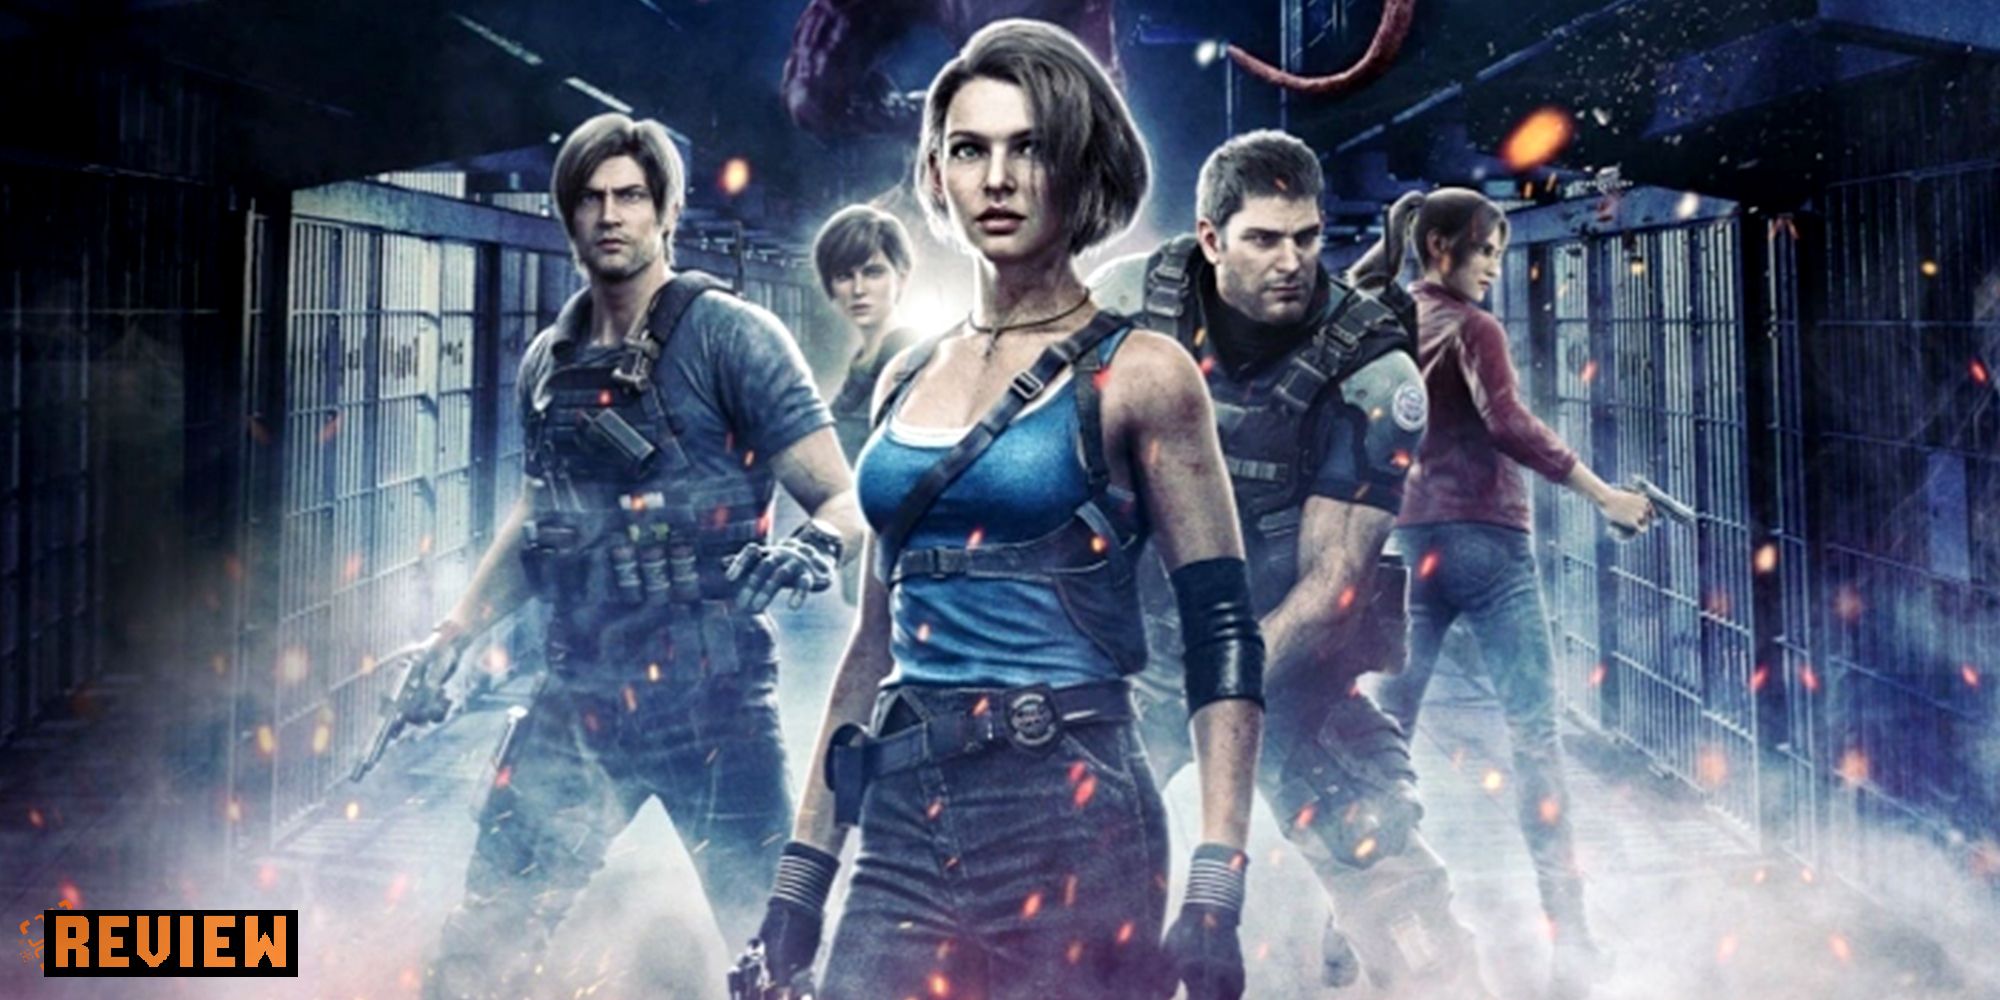 Resident Evil: Death Island release date announced